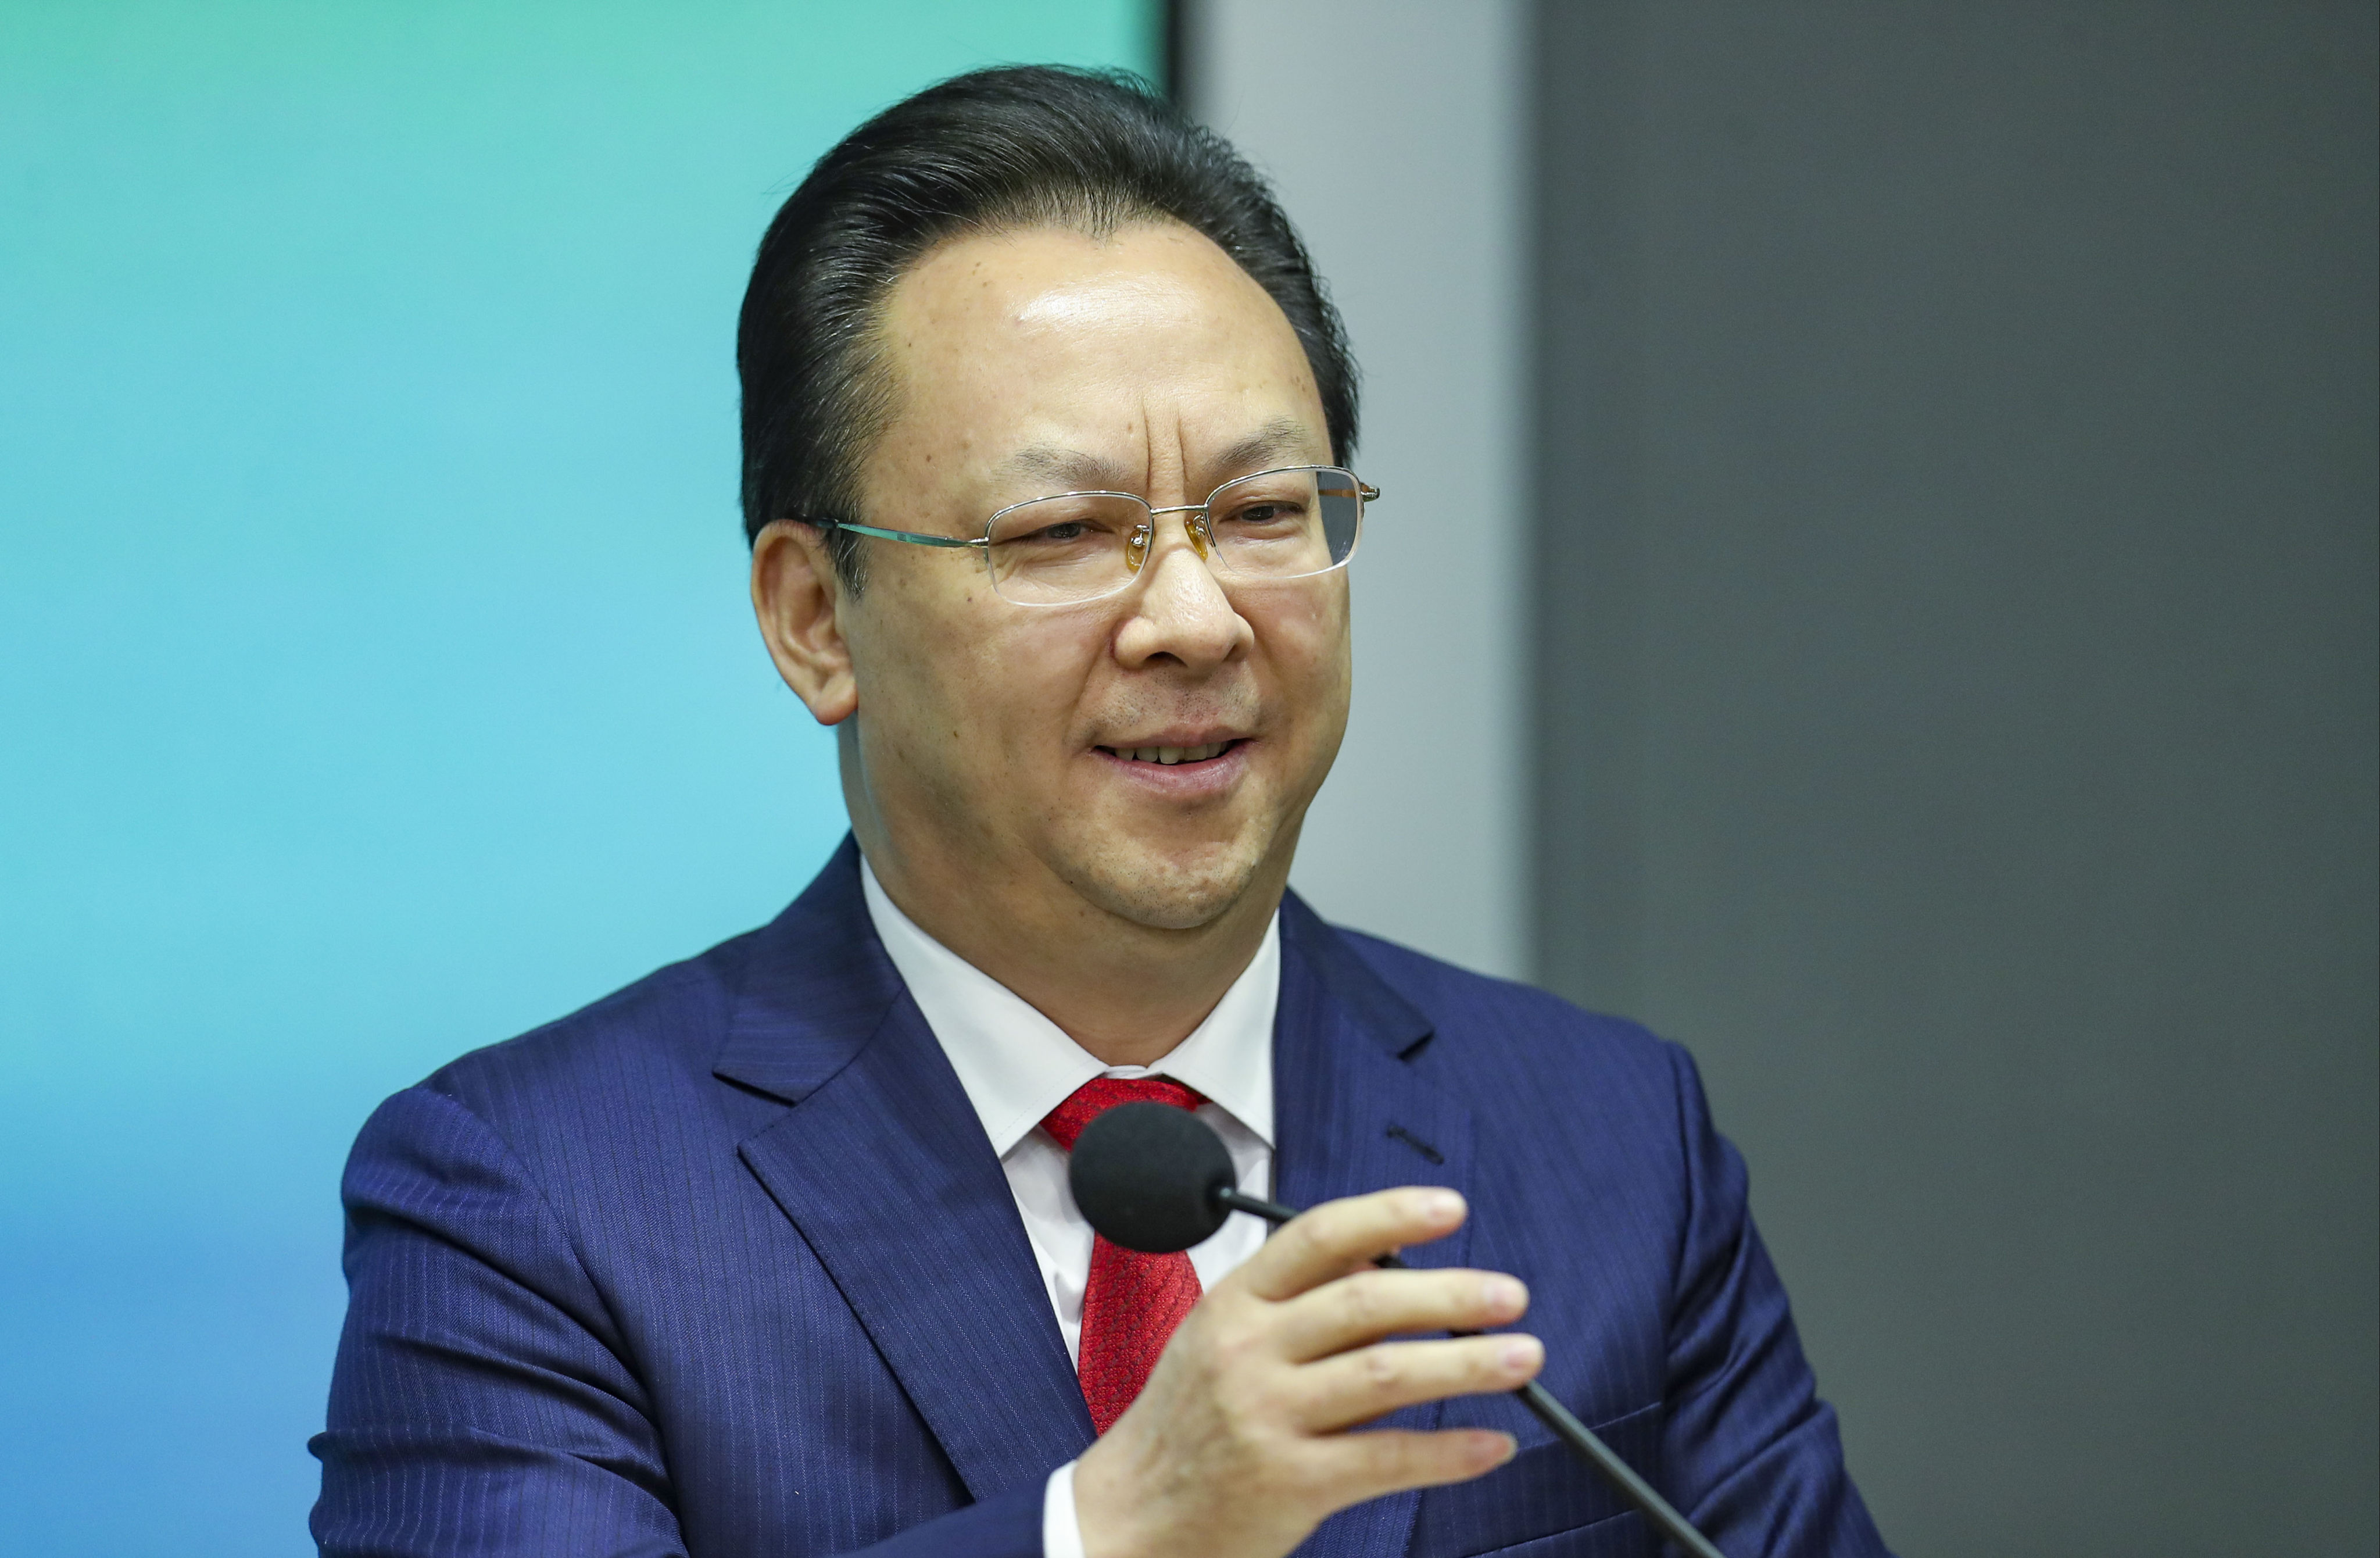 The research interests of Tan Tieniu include image processing, computer vision,  and pattern recognition in the field of artificial intelligence. Photo: SCMP